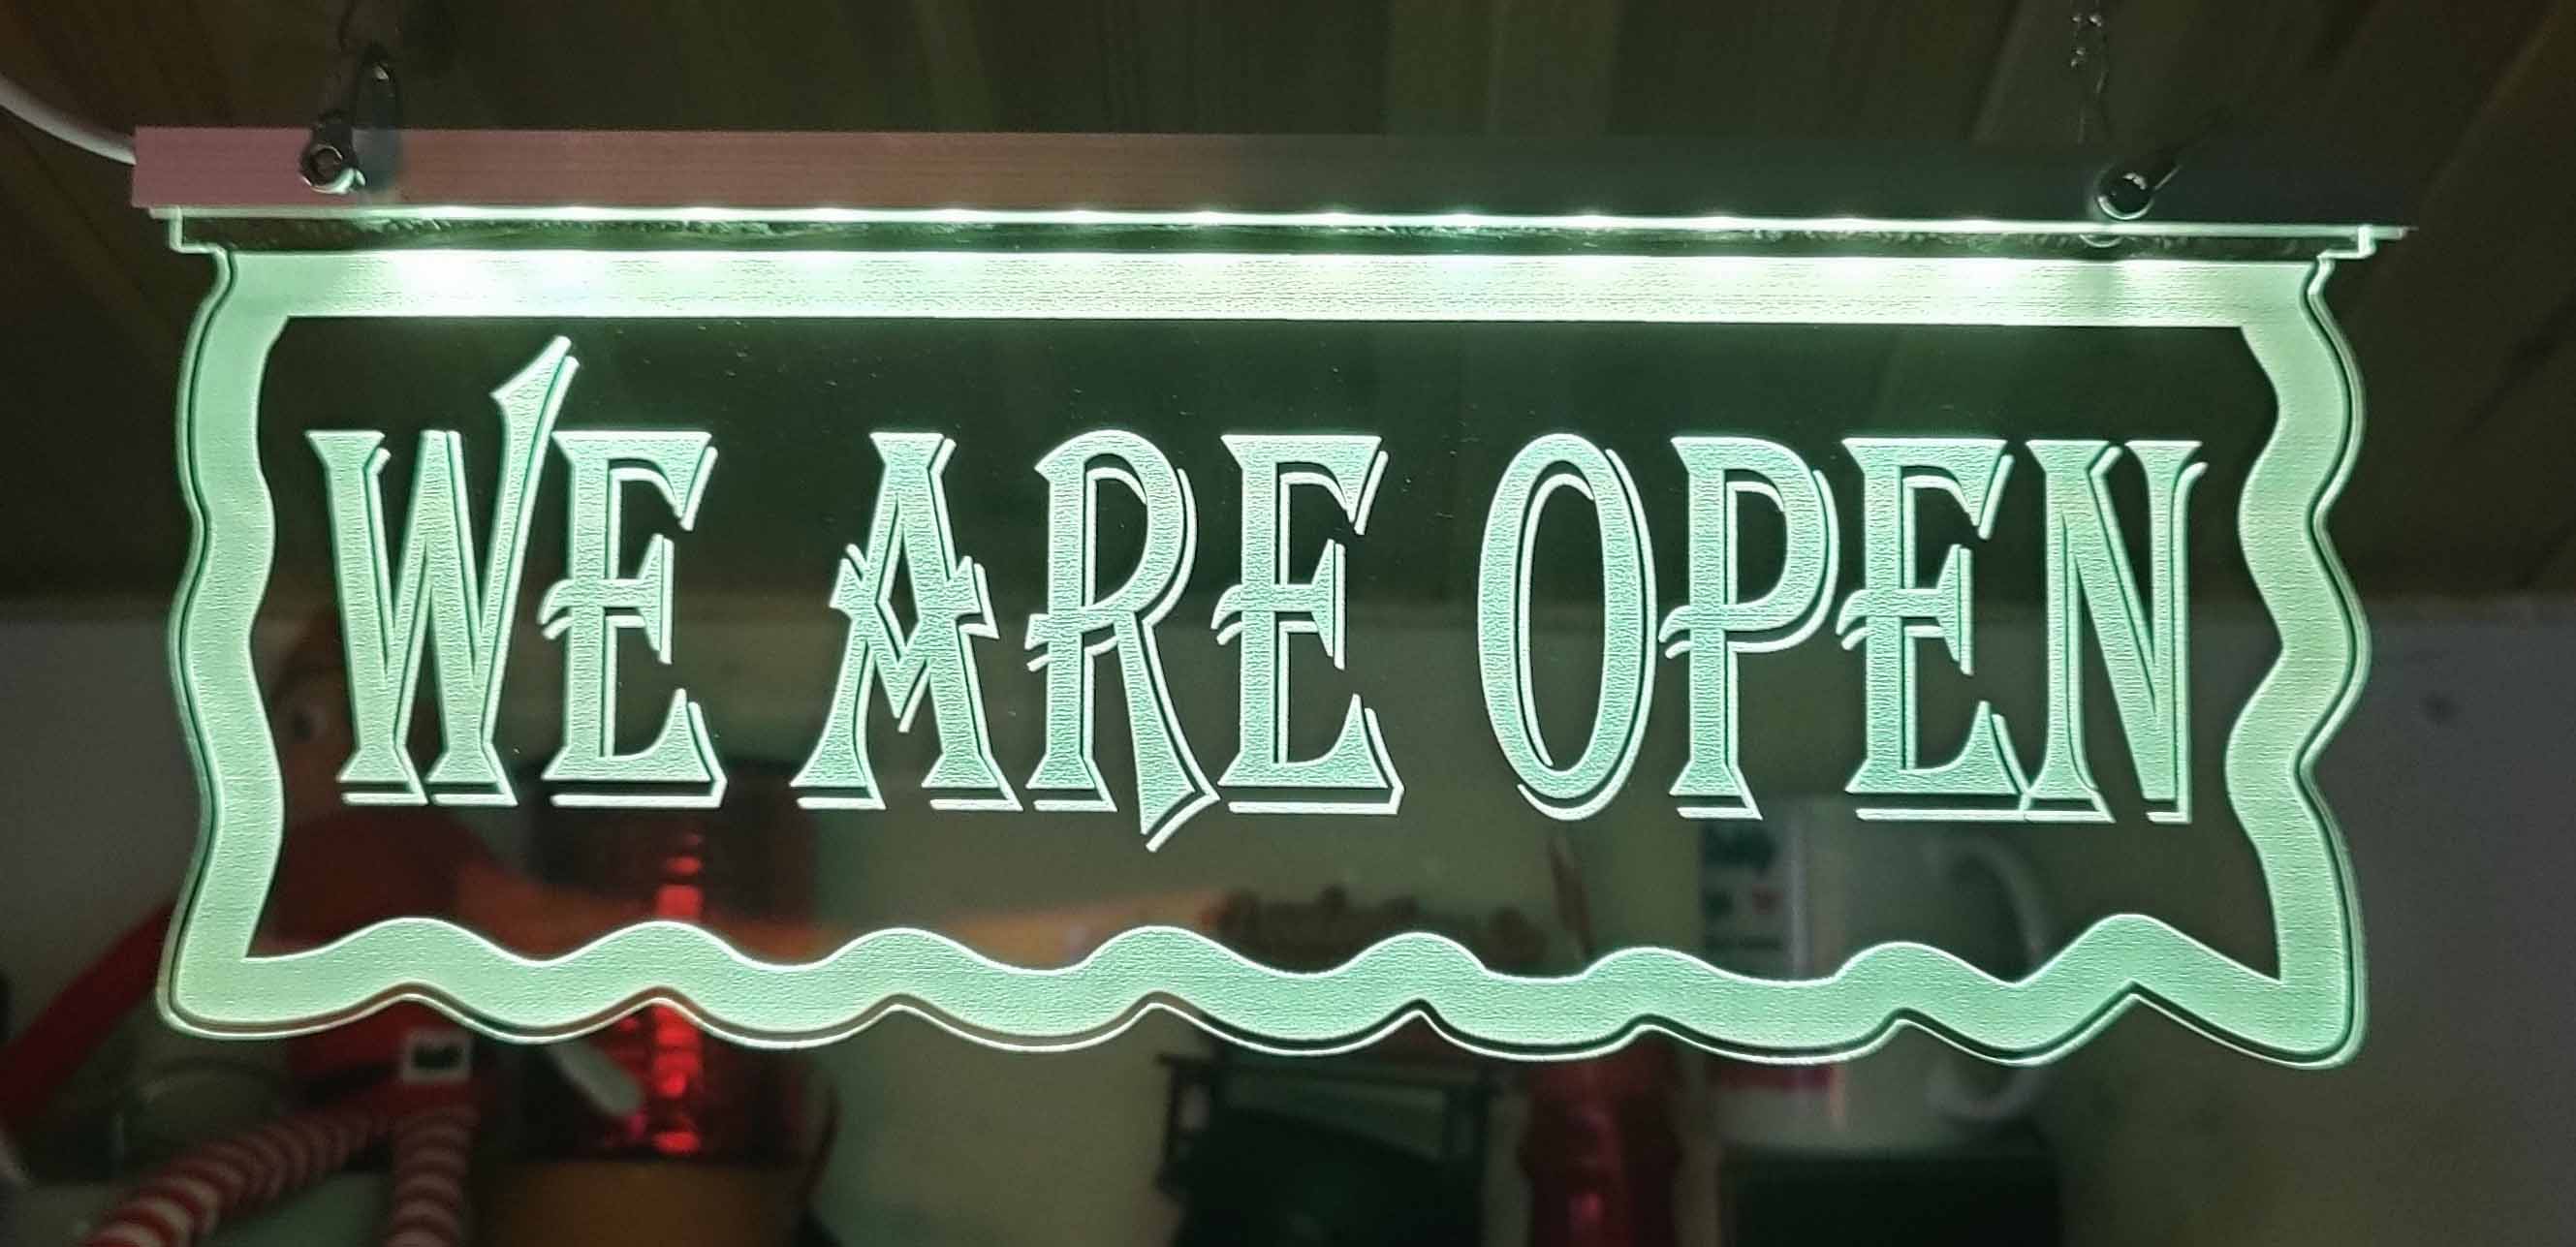 we are open led light up sign 